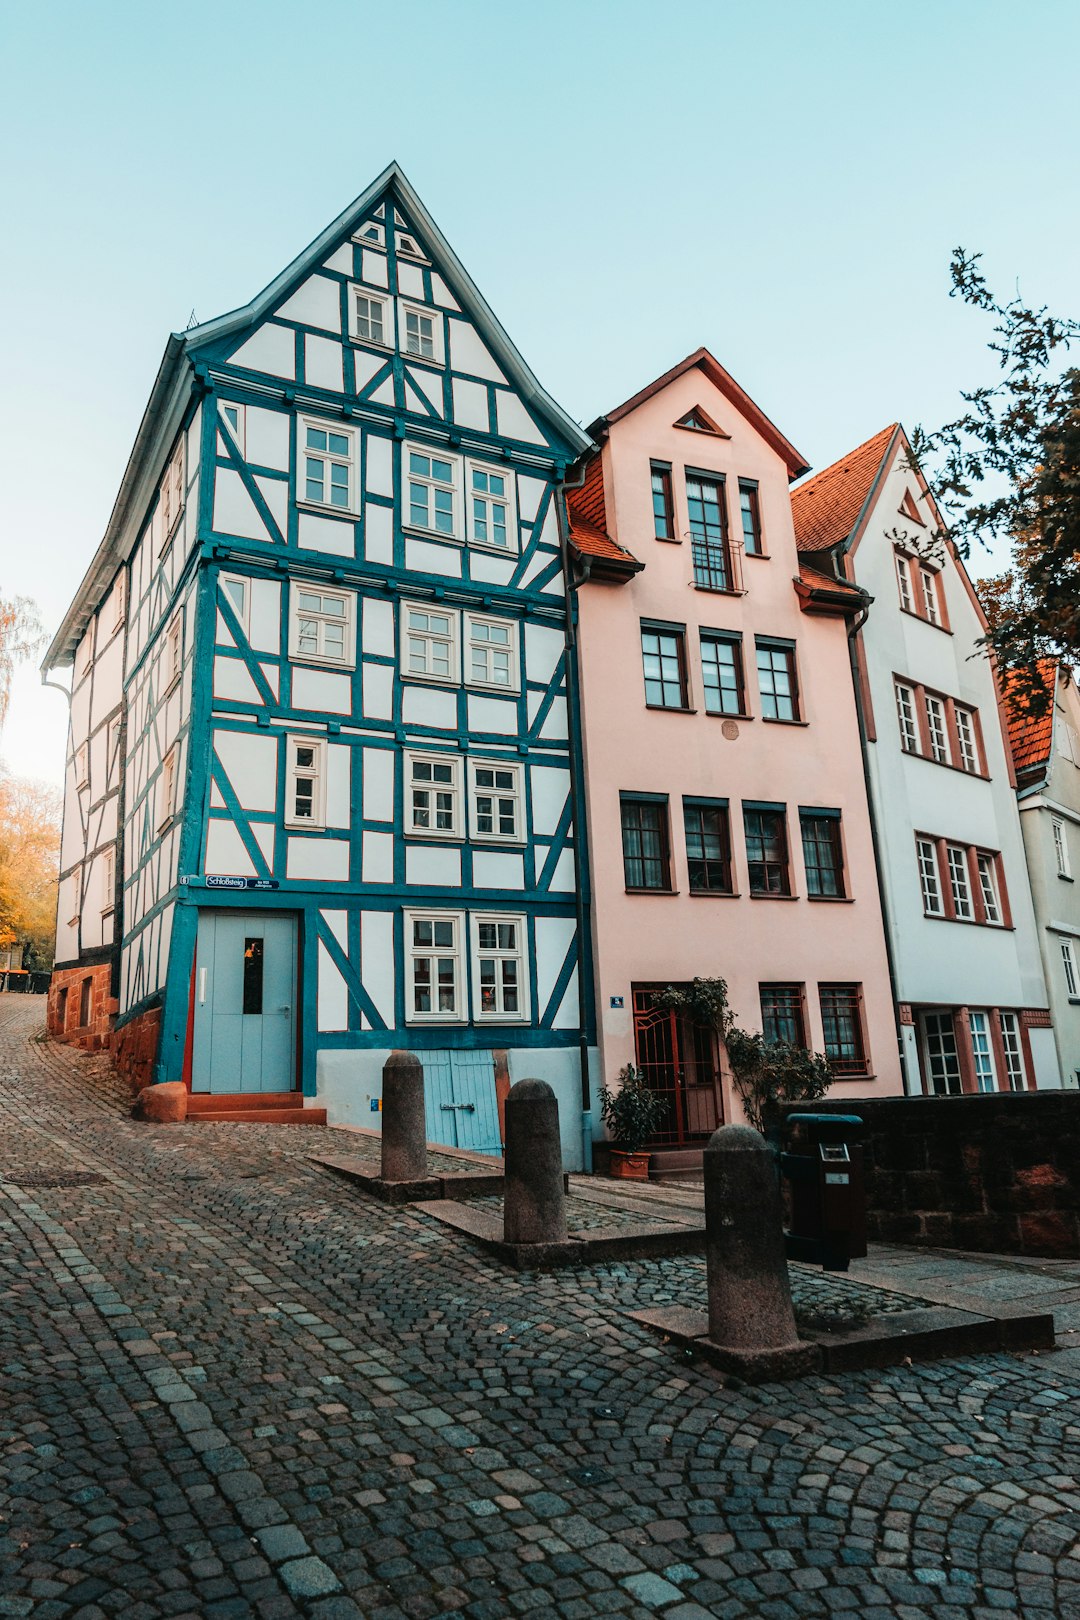 Travel Tips and Stories of Marburg in Germany